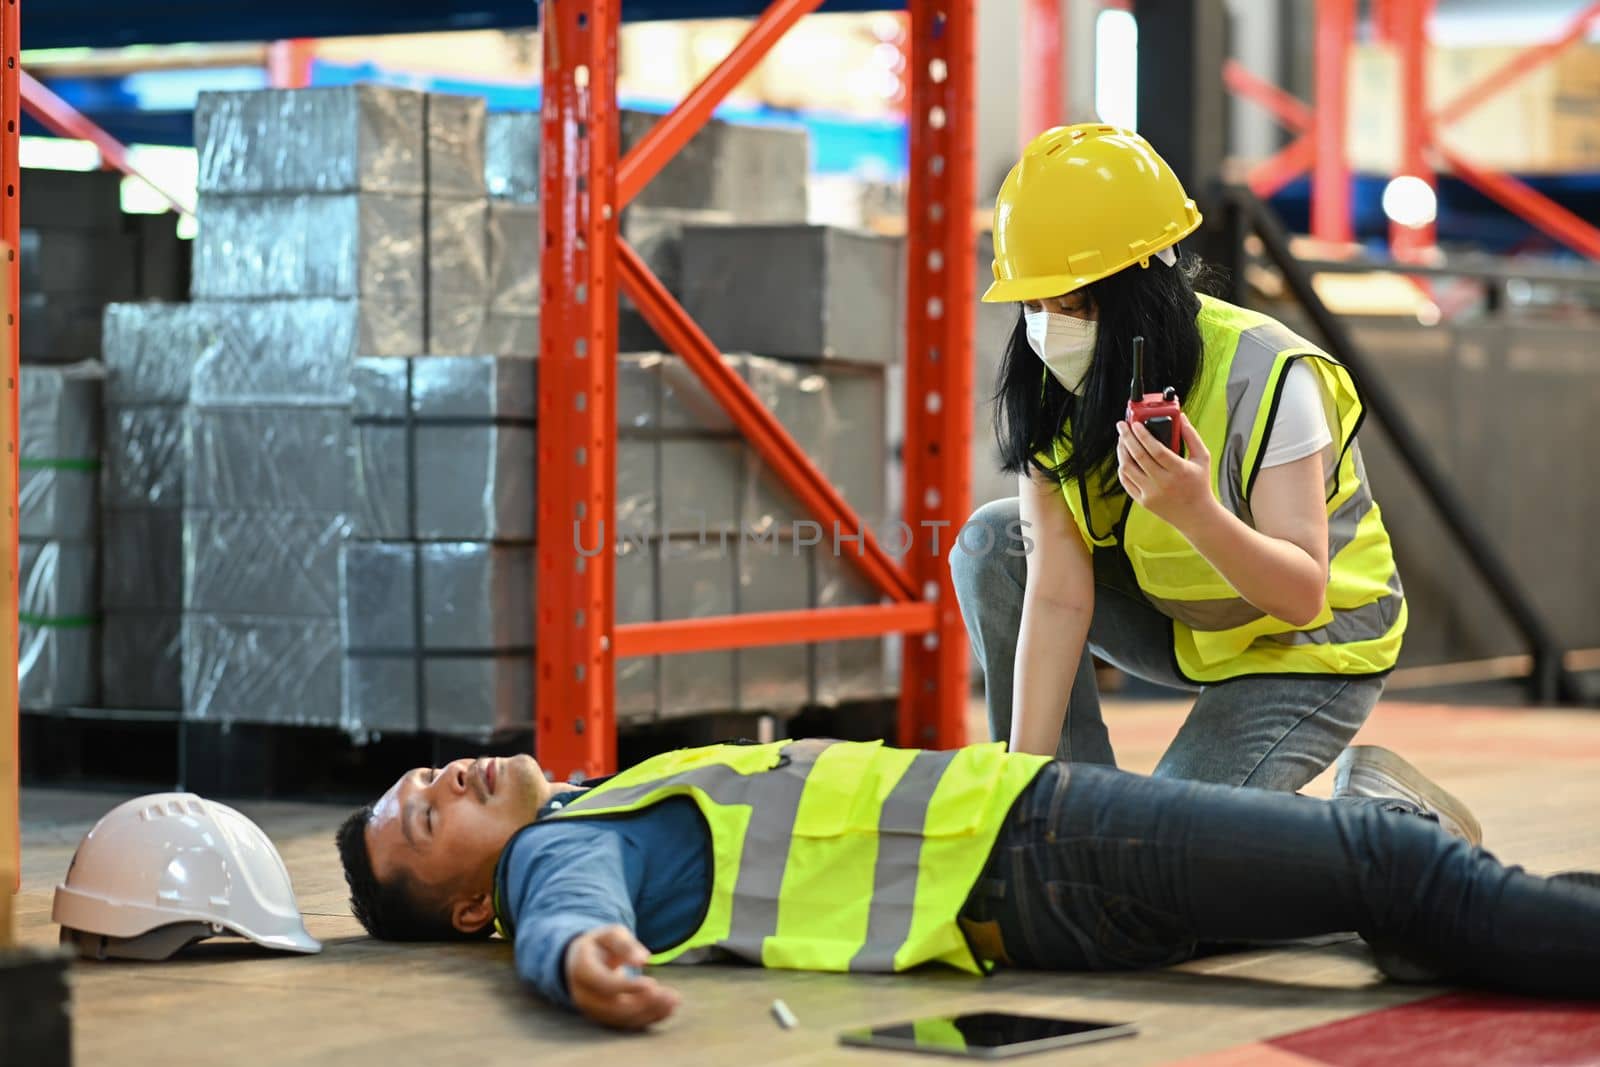 Warehouse worker lying unconscious on floor after accident while colleague calling for help or reporting work accident by walkie talkie by prathanchorruangsak